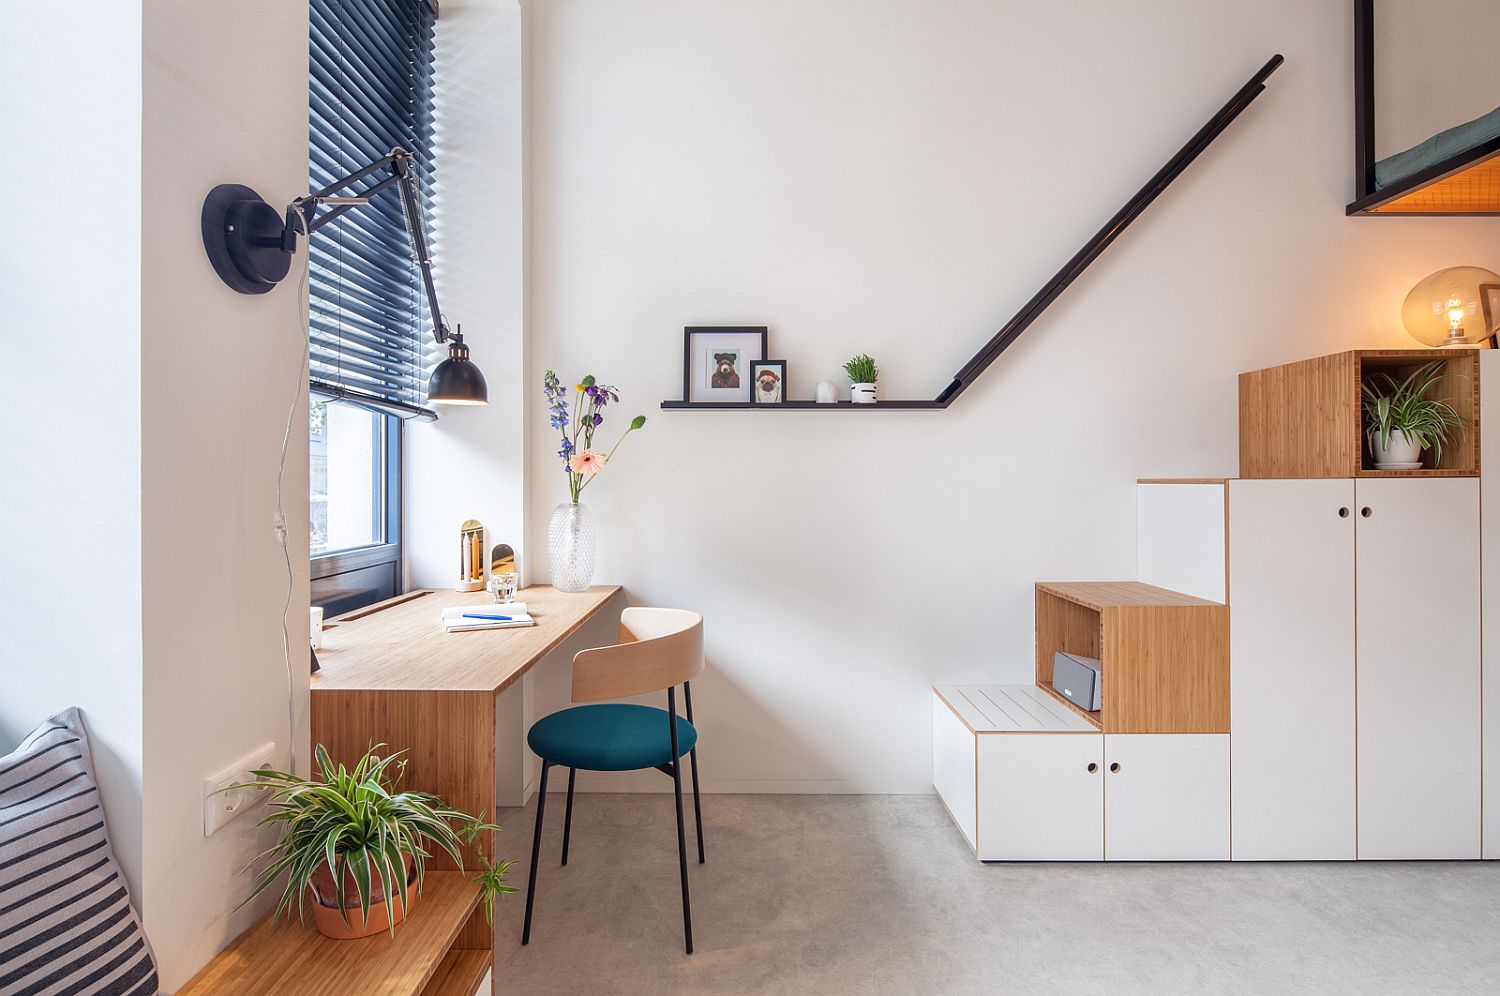 Steps-to-the-loft-turned-into-storage-units-inside-the-tiny-apartment